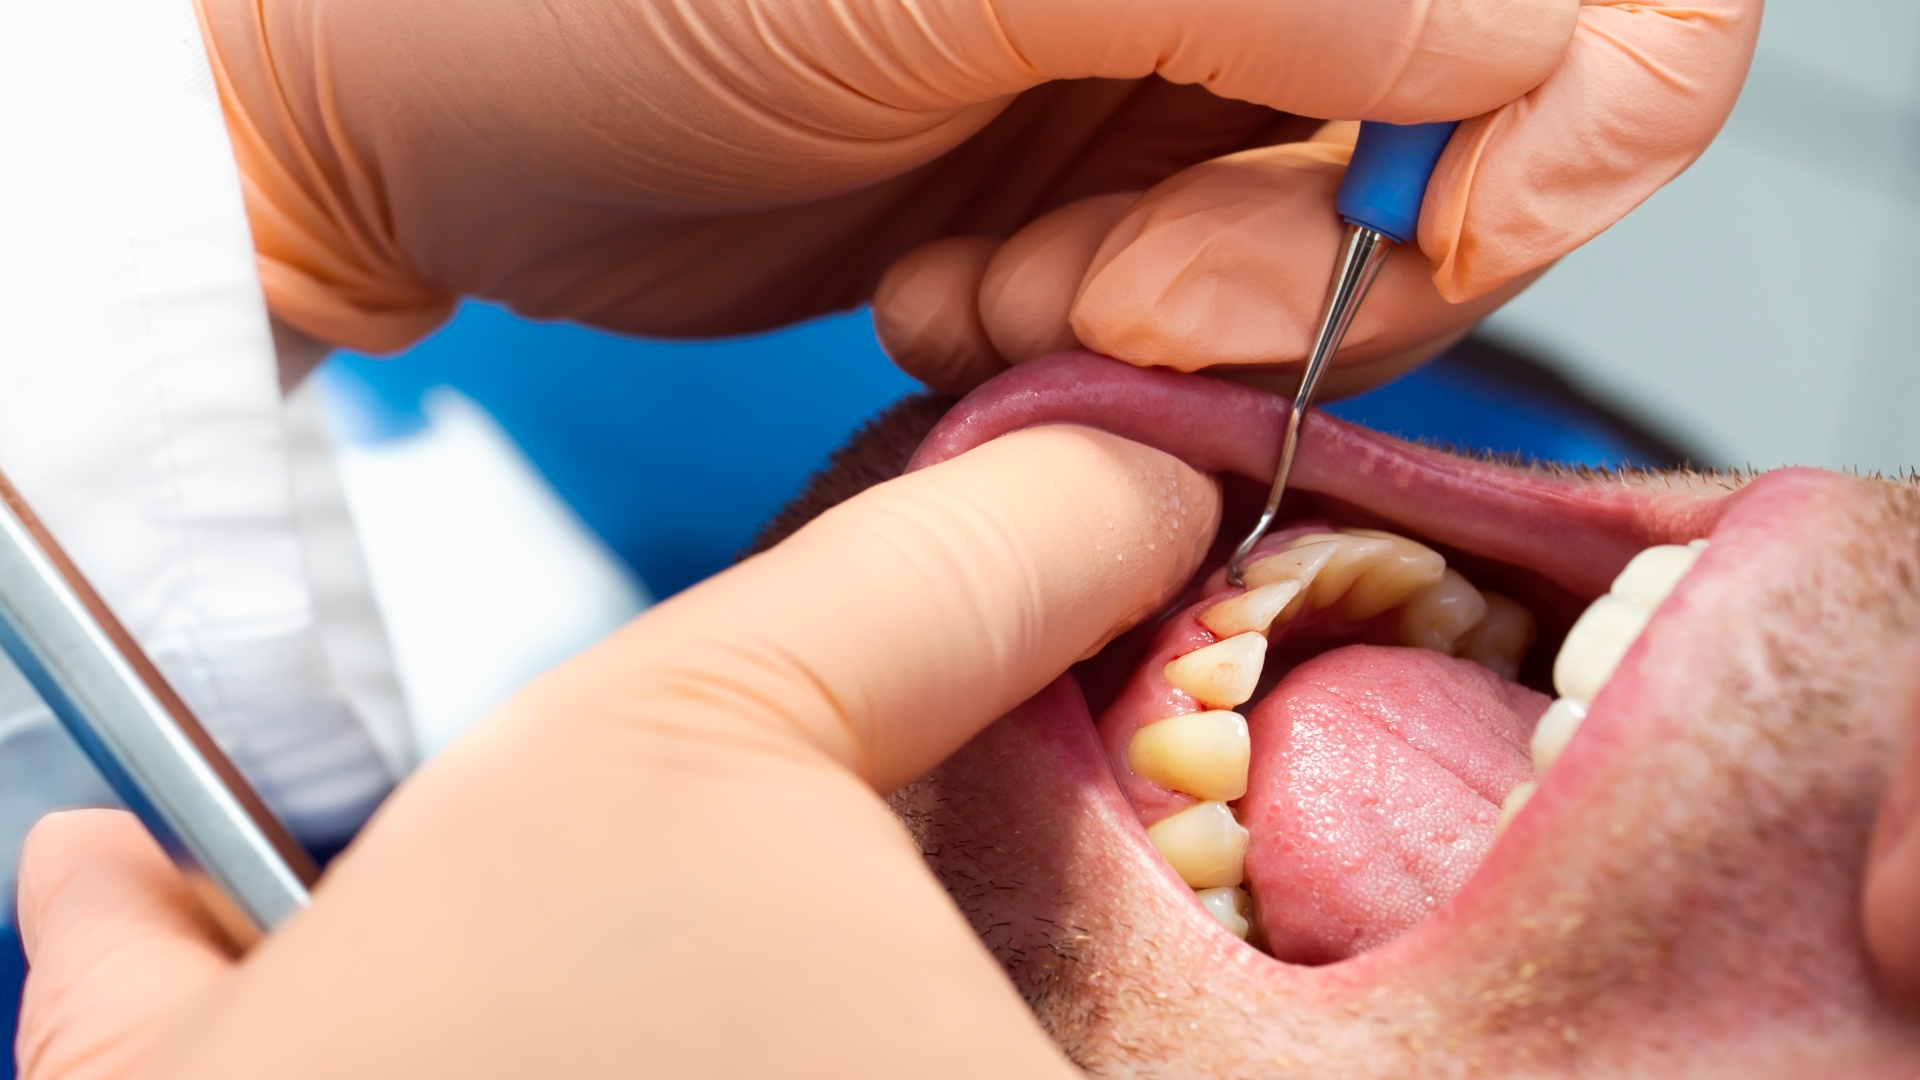 I'm a dentist - here's 5 things your mouth says about you & when to see a doctor